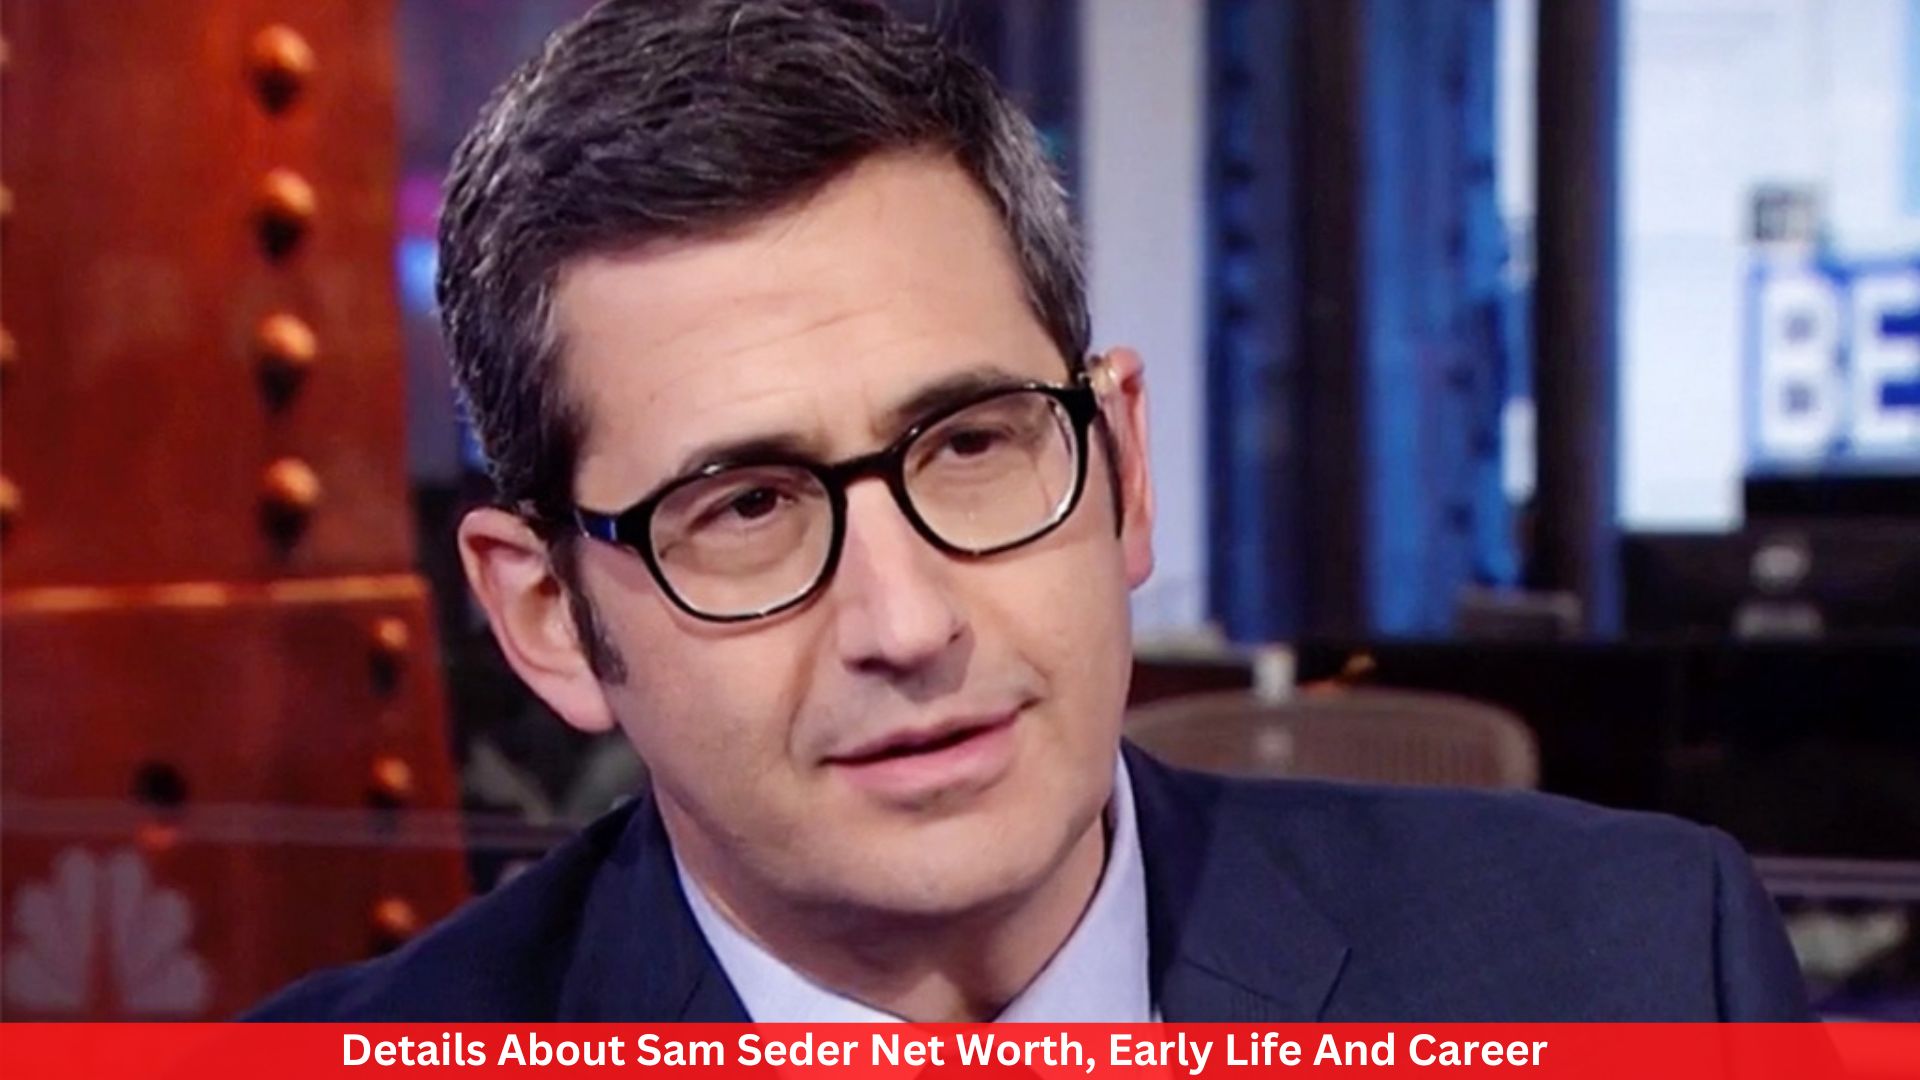 Details About Sam Seder Net Worth, Early Life And Career